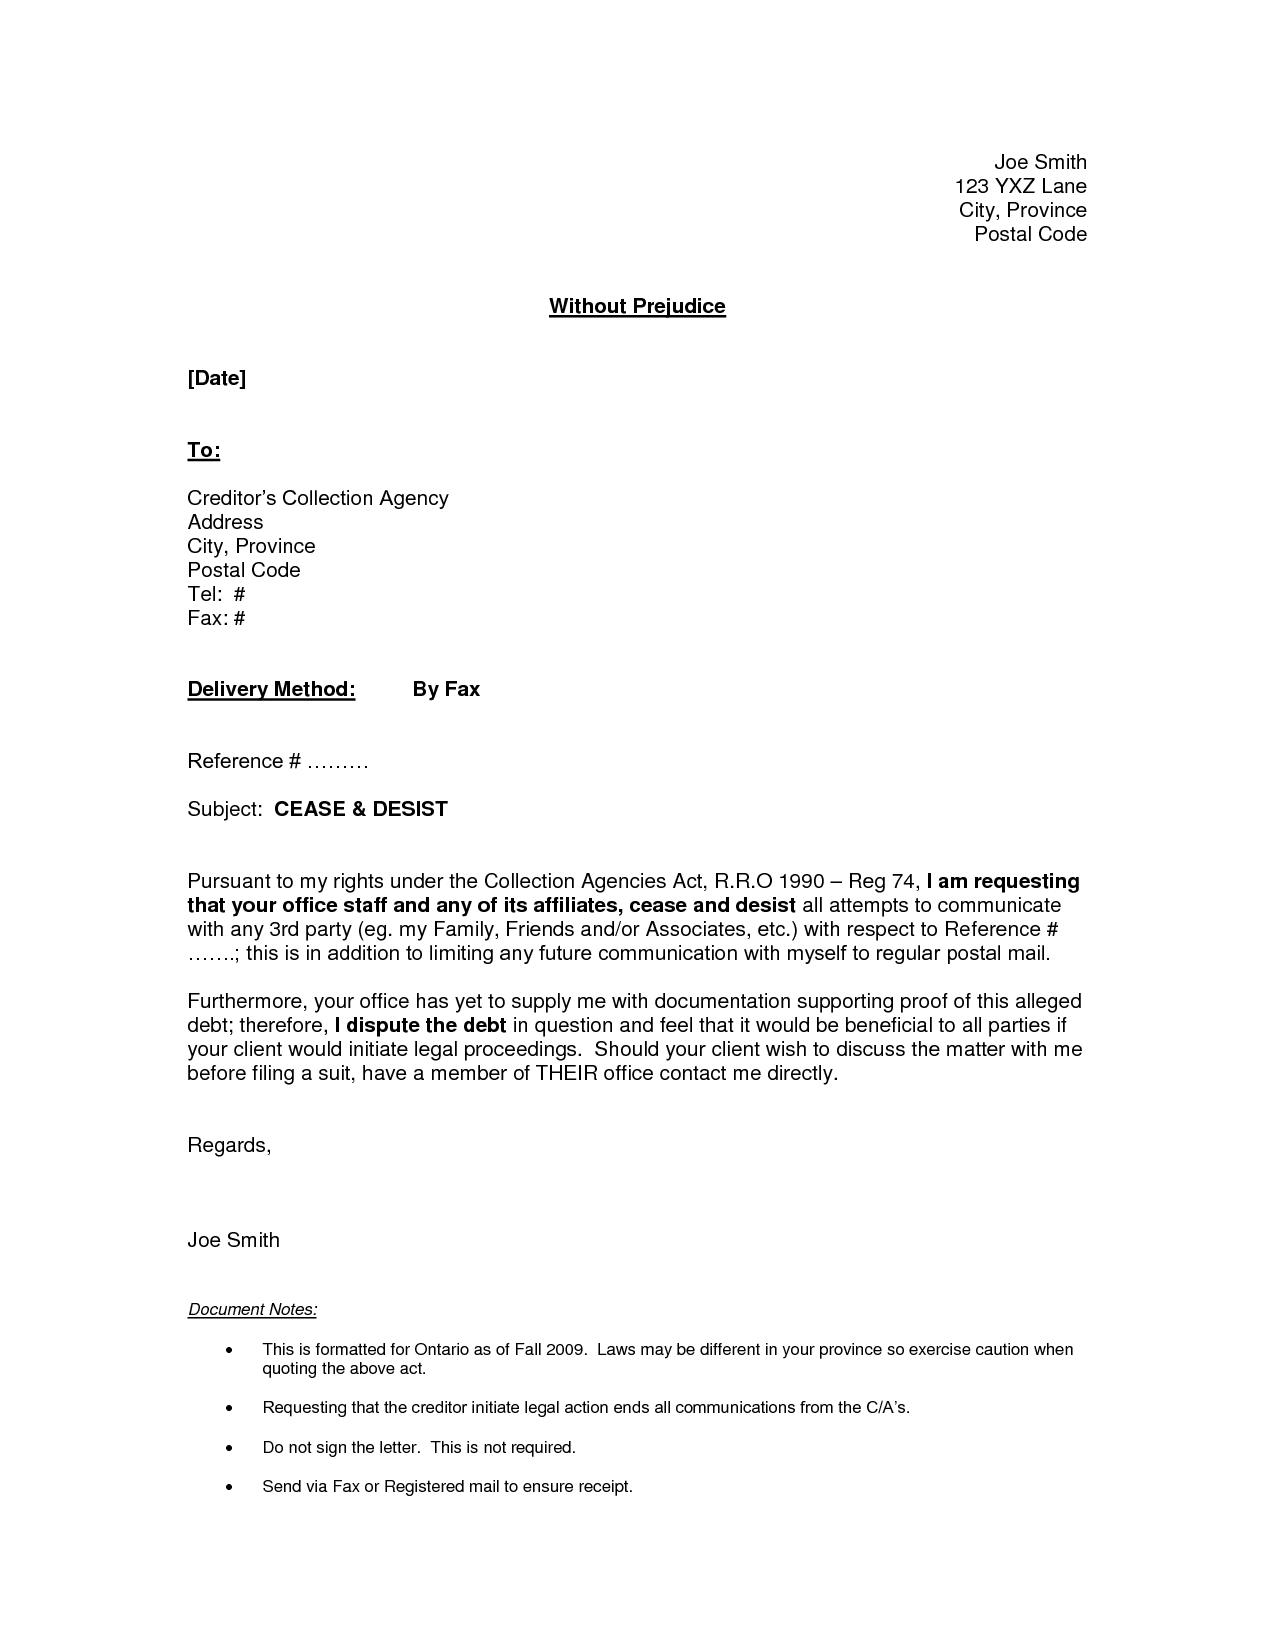 Trademark Cease And Desist Letter Sample Free Printable Documents